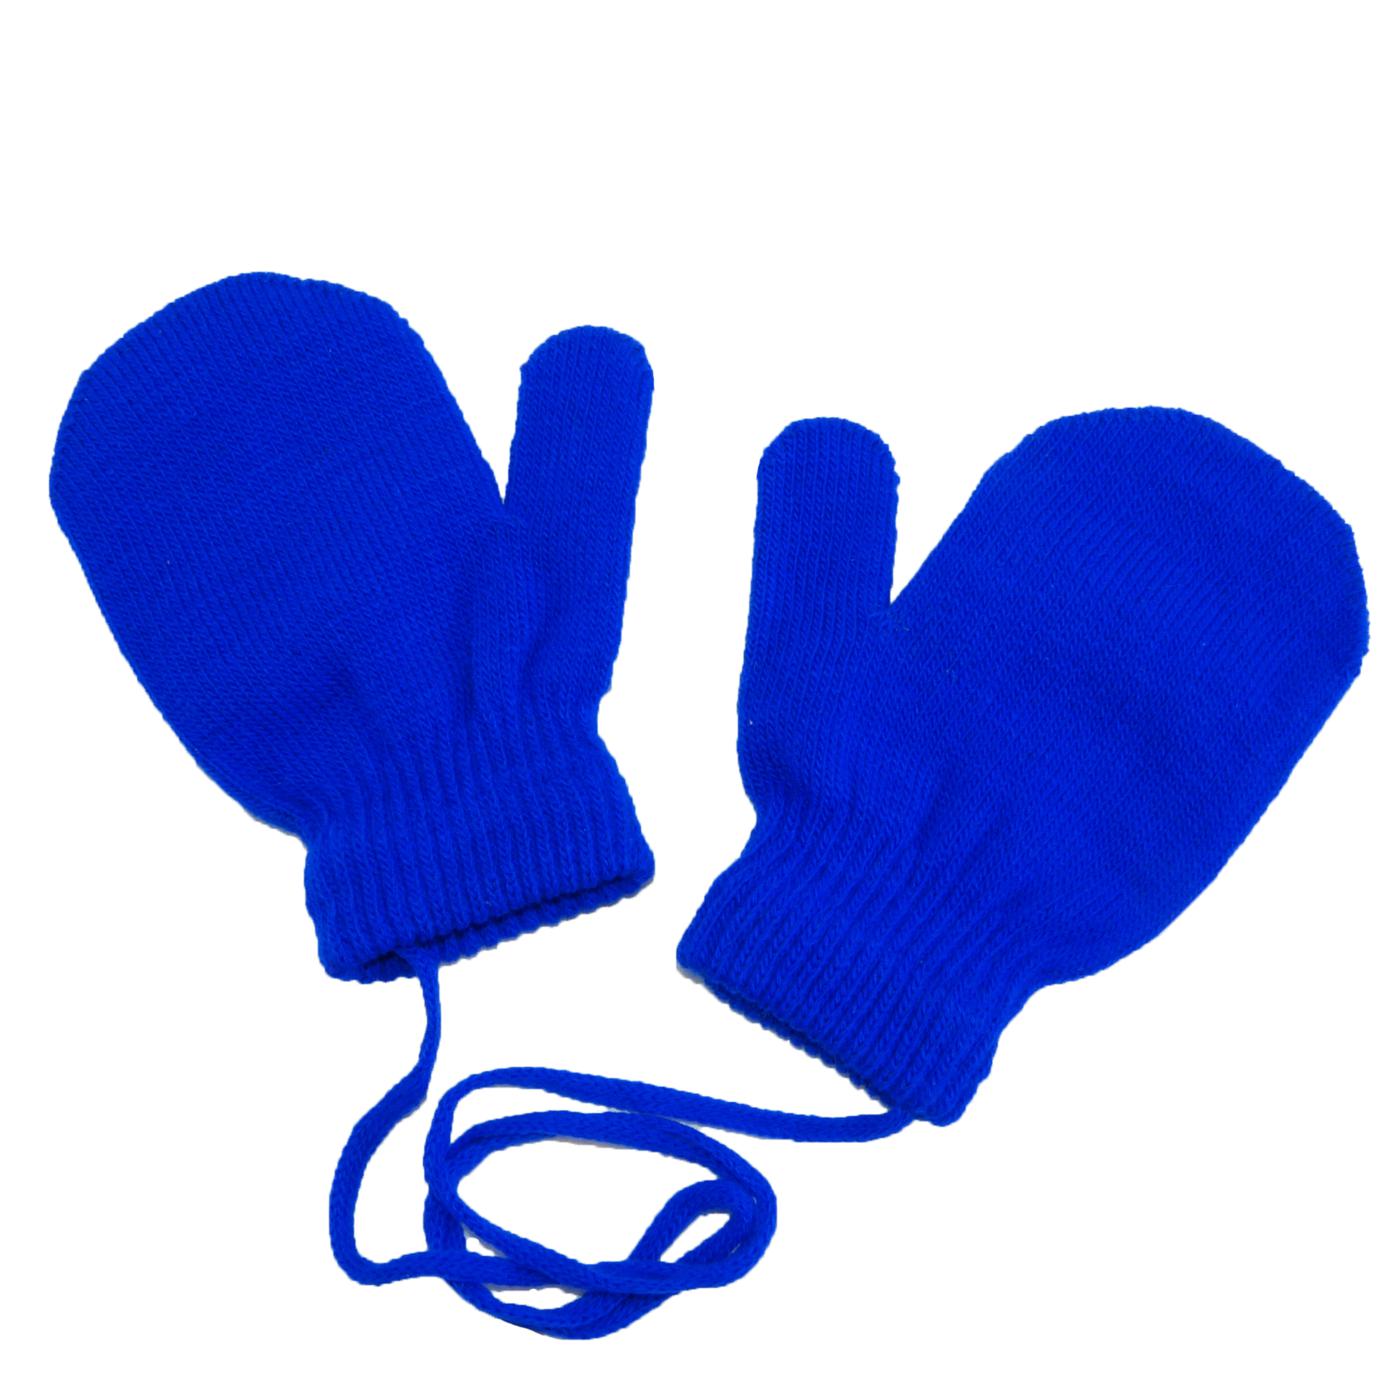 clipart of mittens - photo #15